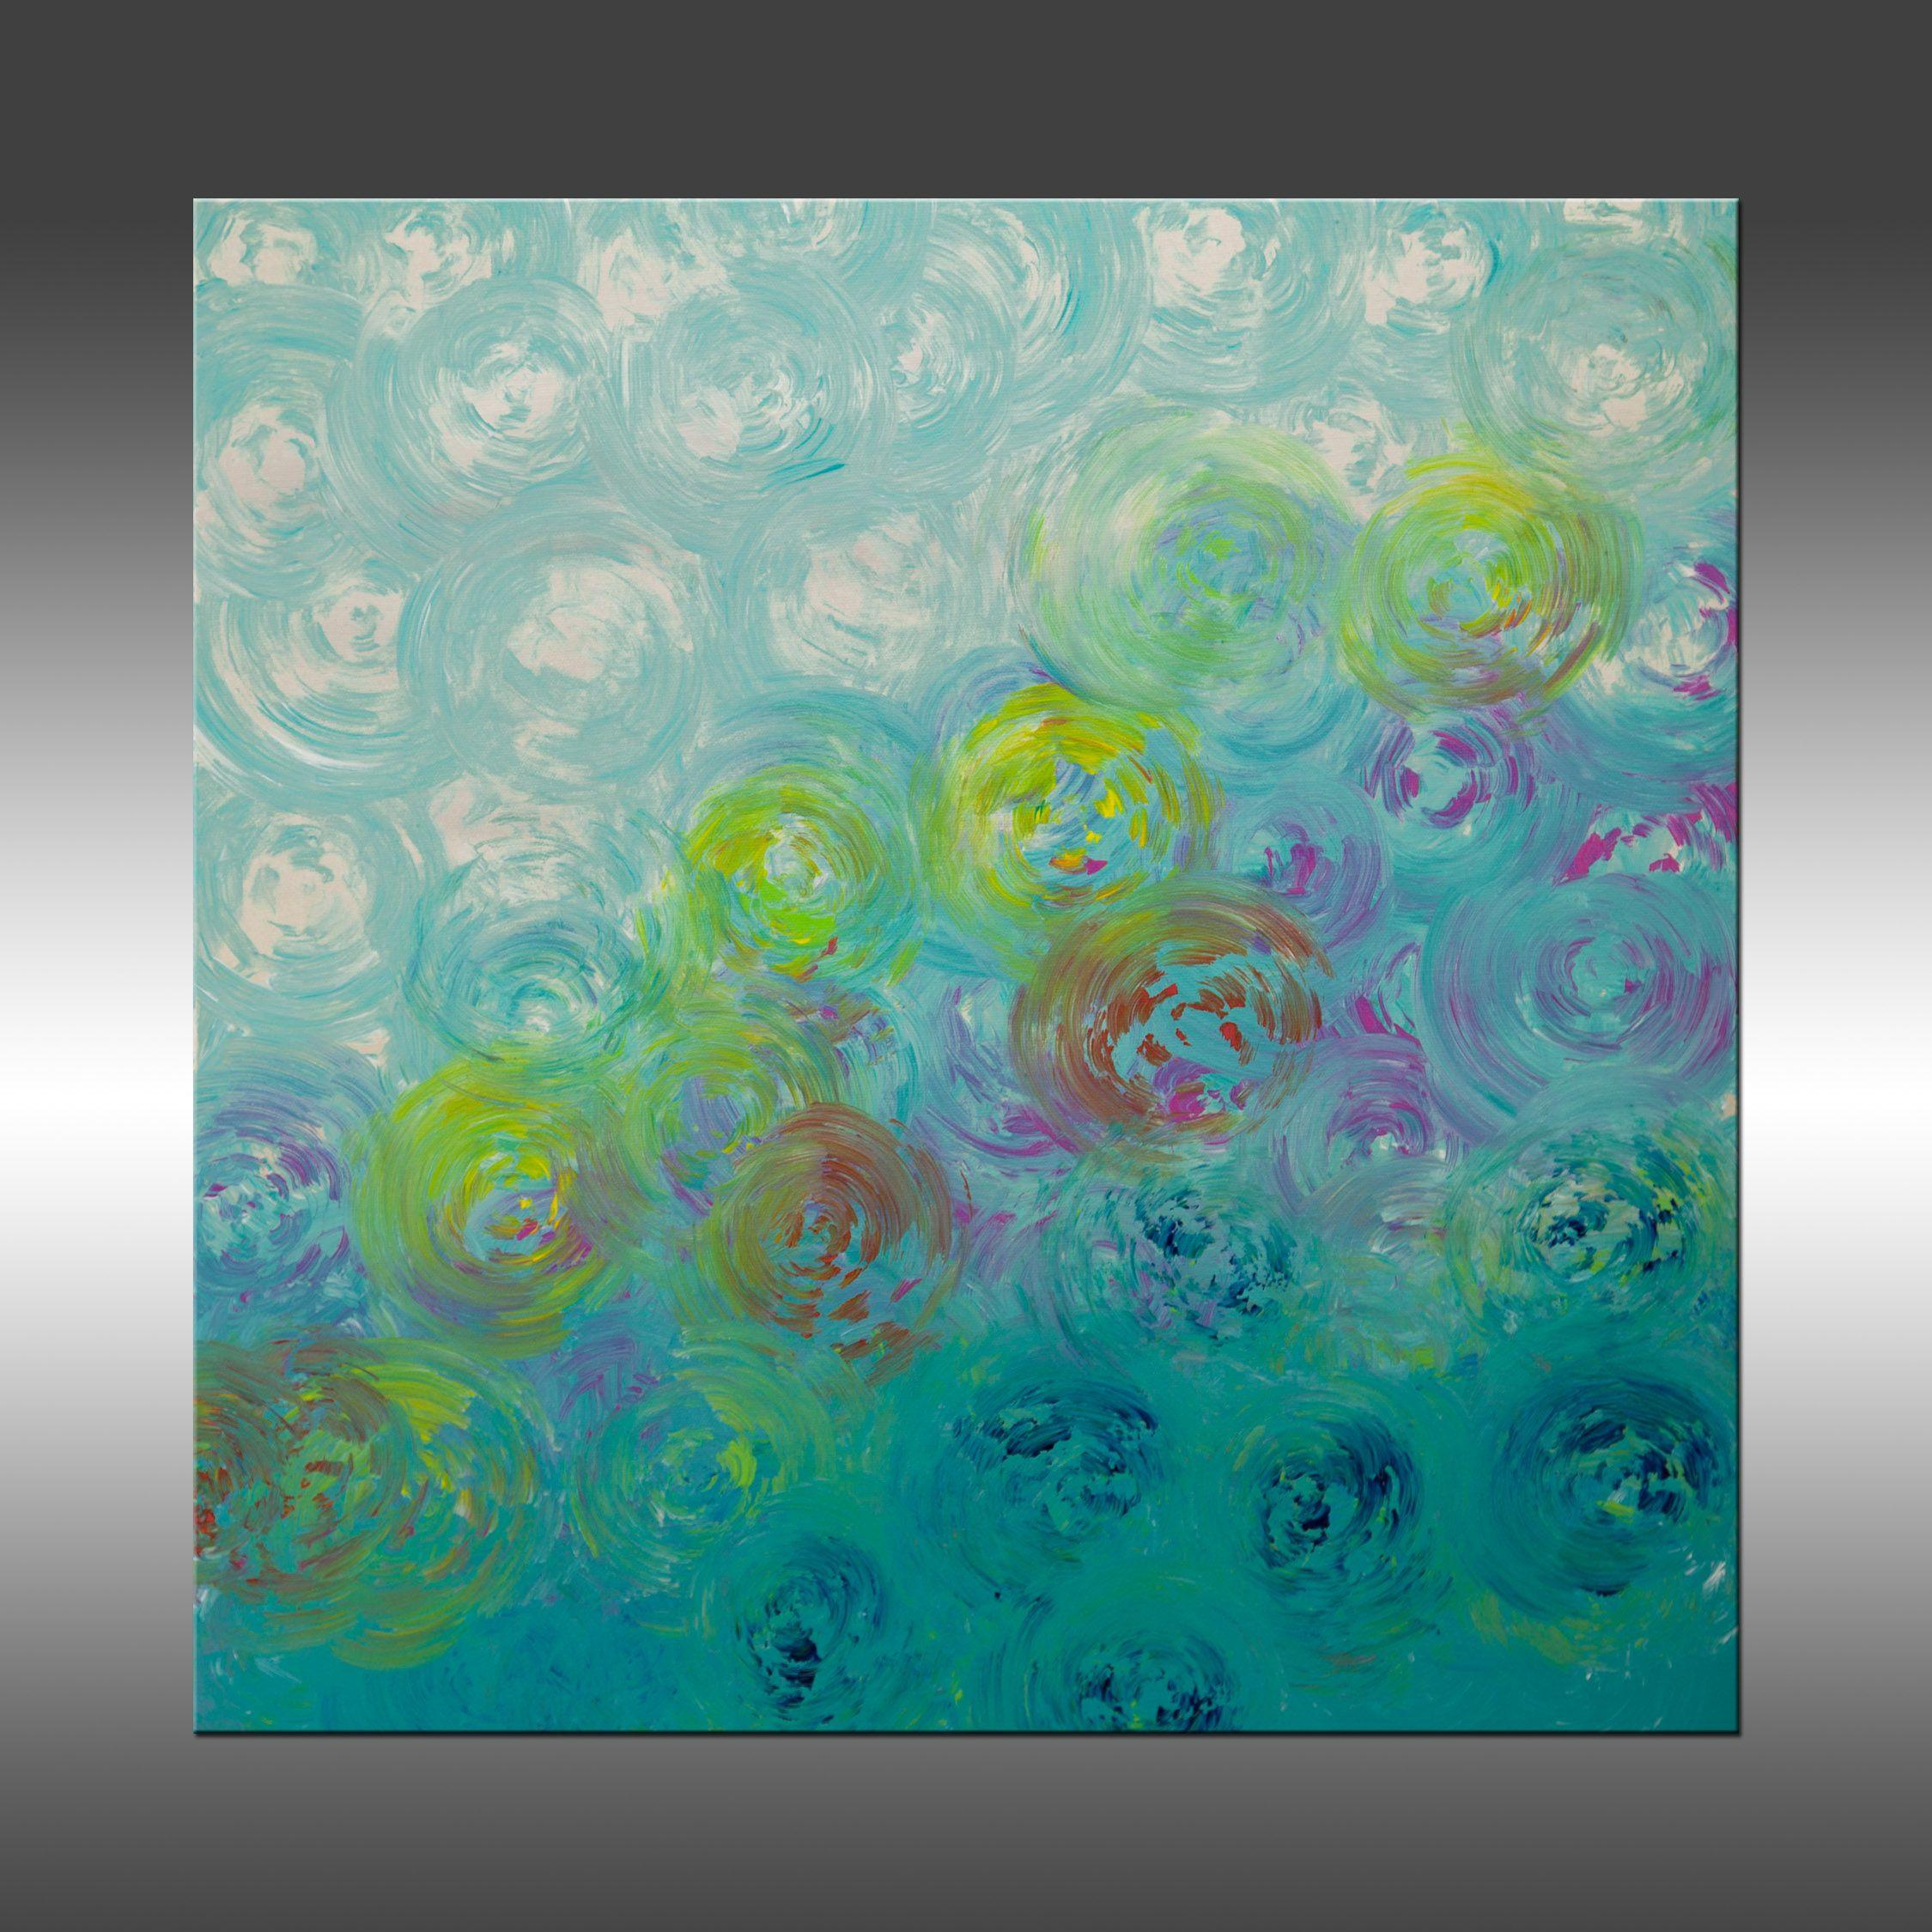 Synchronicity 14 is an original painting, created with acrylic paint on gallery-wrapped canvas. It has a width of 20 inches and a height of 20 inches with a depth of 1.5 inches (20x20x1.5).    The colors used in the painting are white, teal, blue,